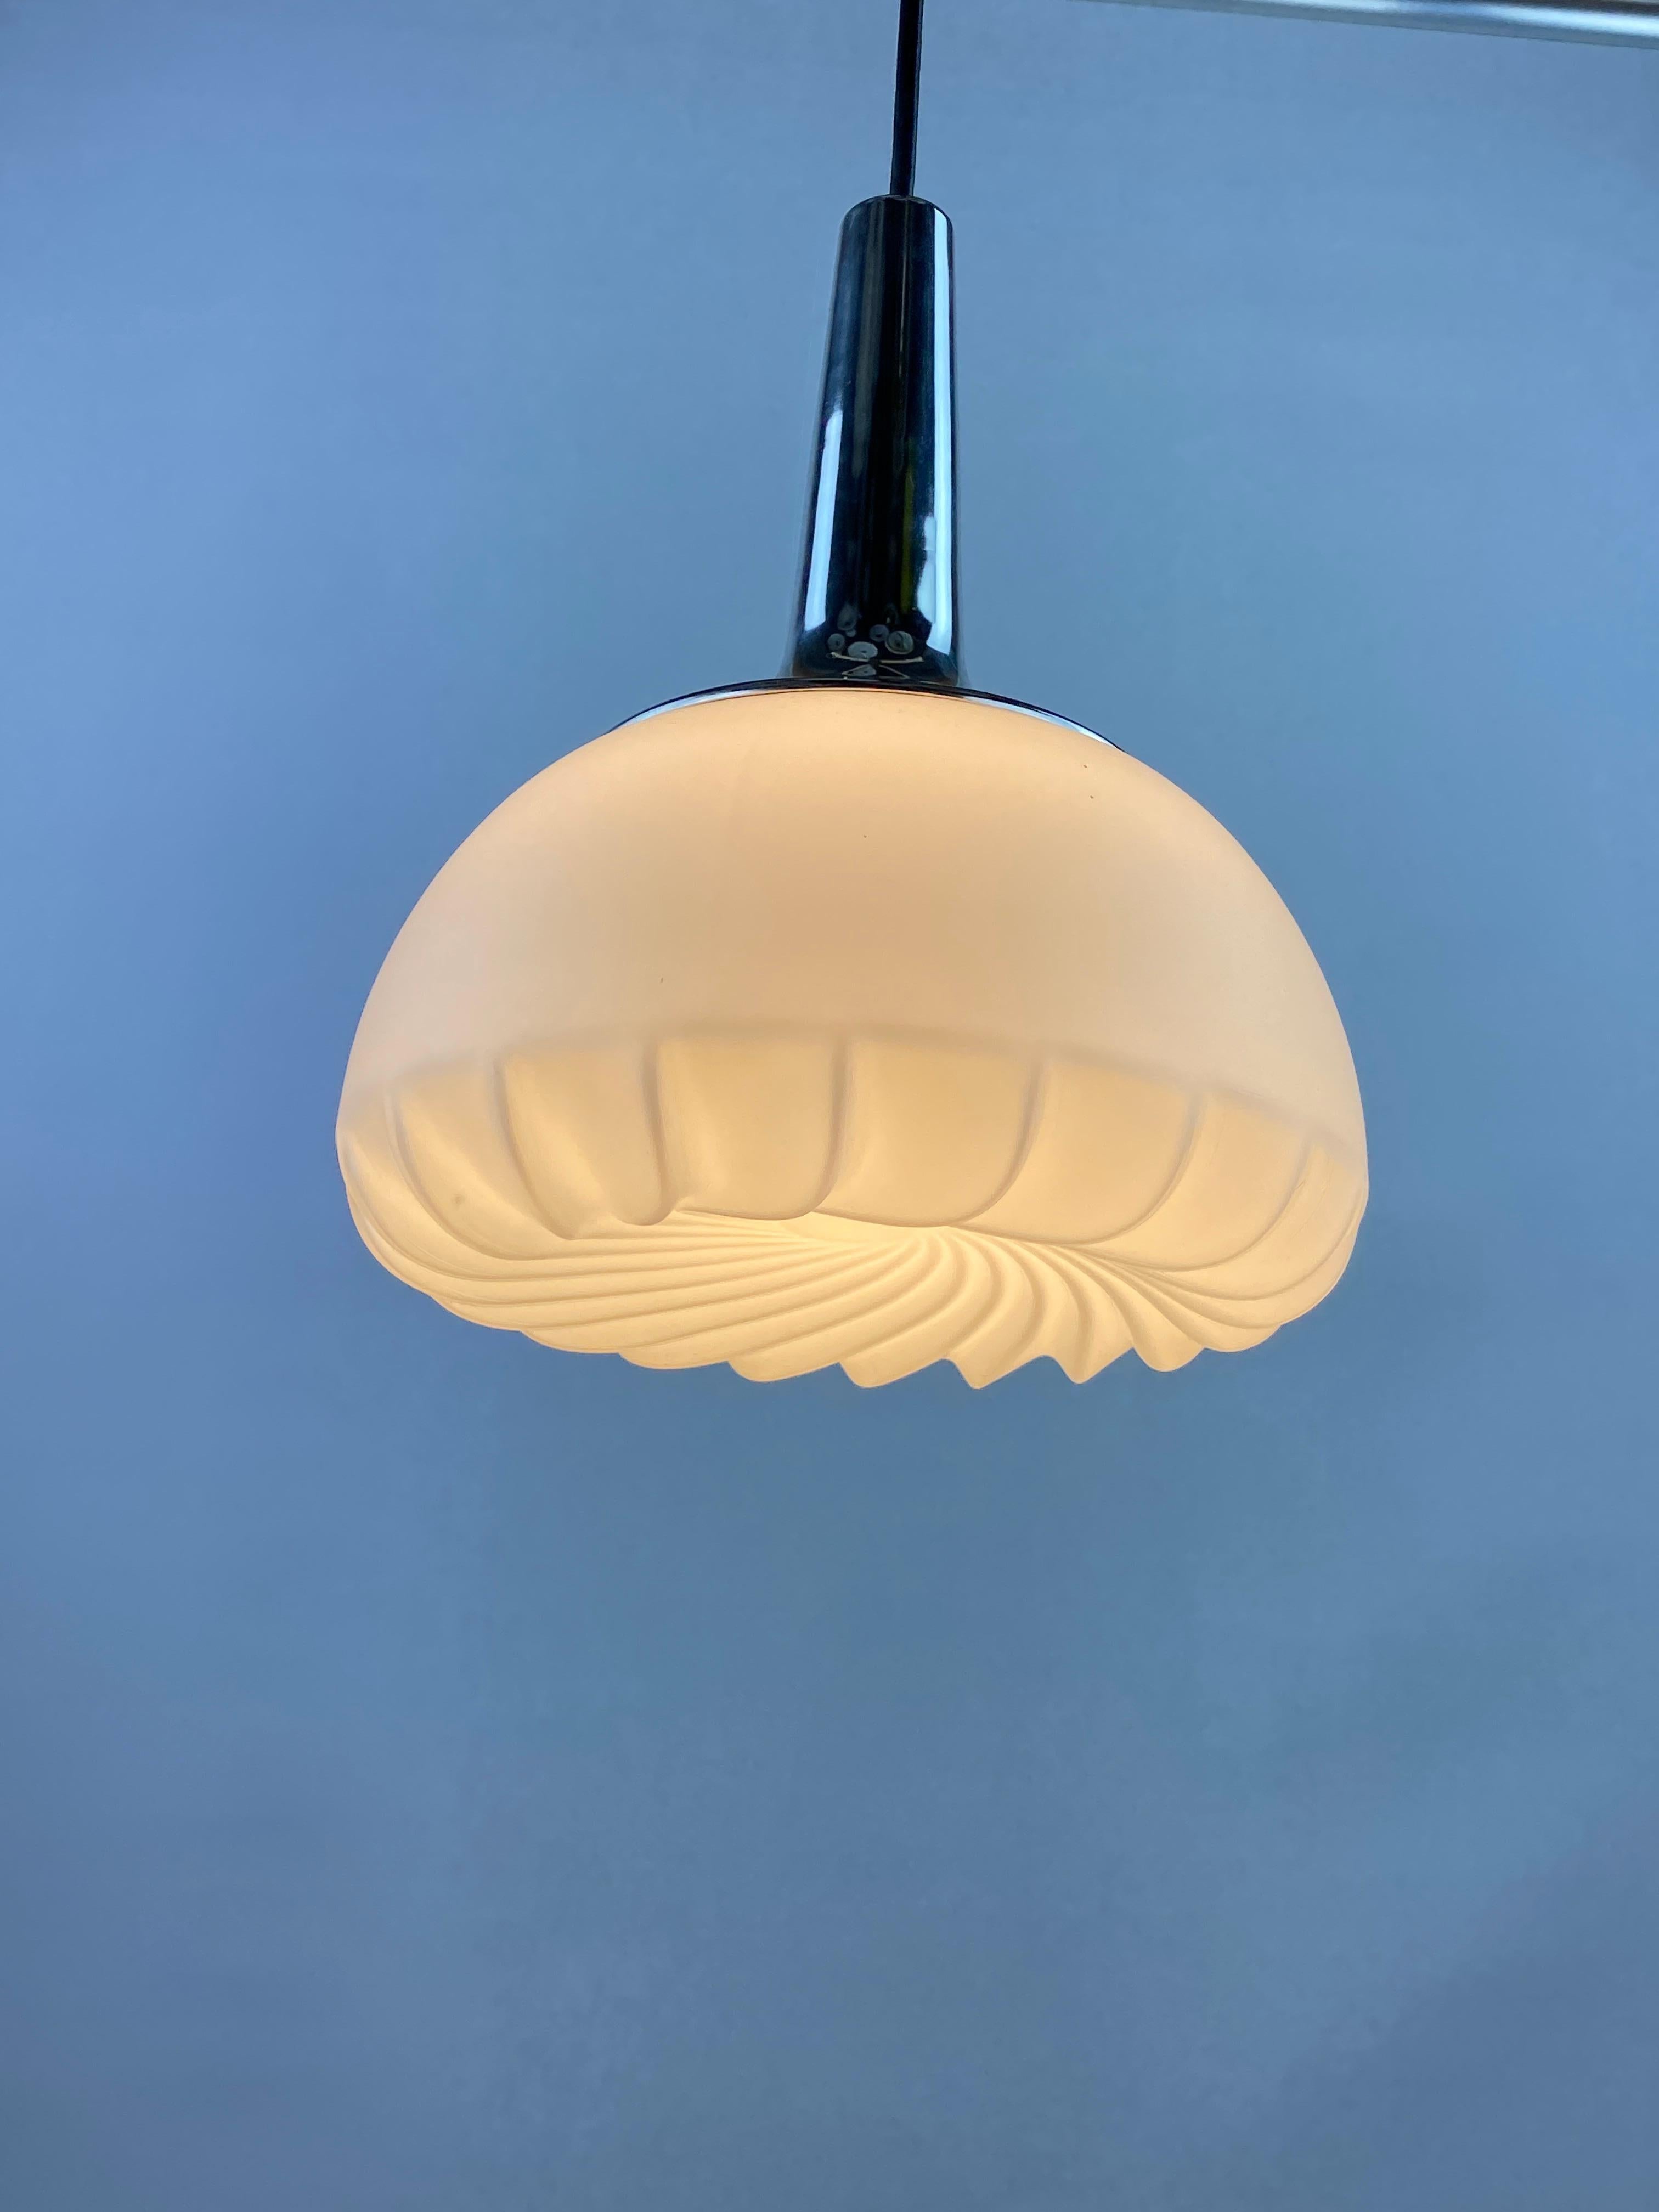 Rare frosted glass and chrome pendant light by Peill and Putzler from the 1970's. Provides very warm diffuse light. Has a funky but elegant swirl on the bottom of the lamp.


DIMENSIONS
Height: 31cm
Diameter: 24cm
Cord length: 40cm

PRODUCT